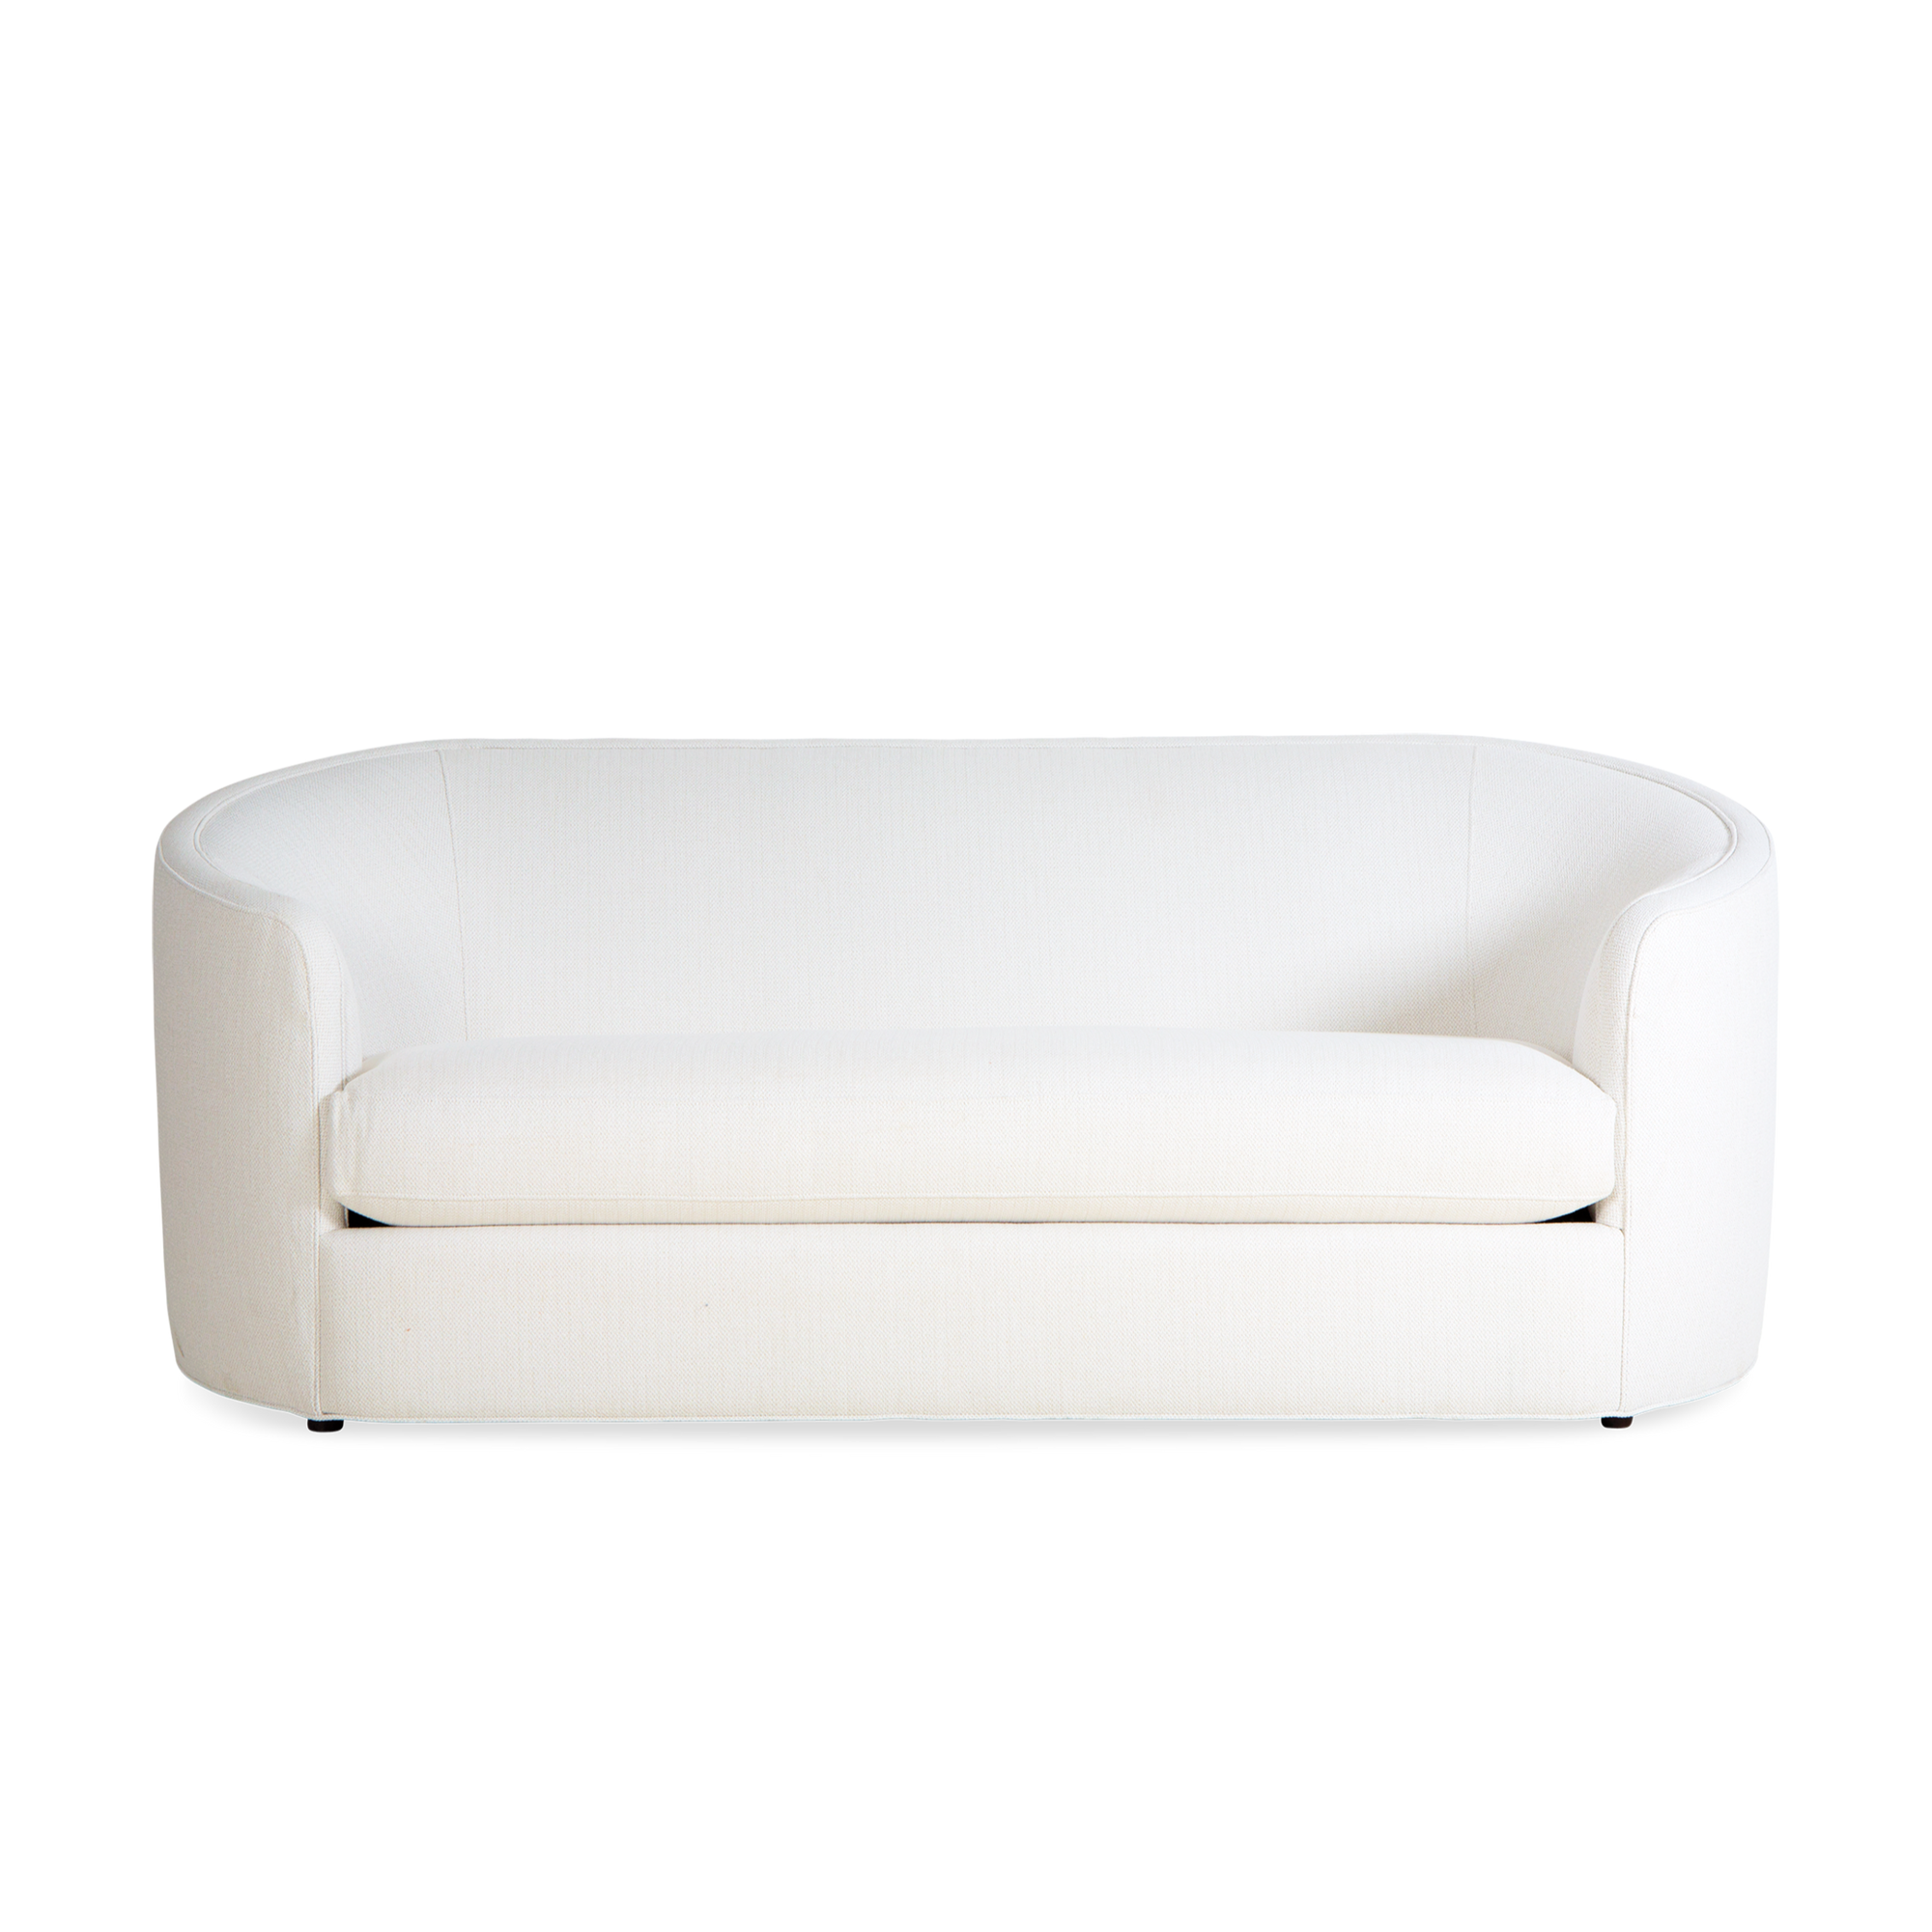 Designed for modern living rooms, the Quincy Sofa is sure to be a conversation piece.